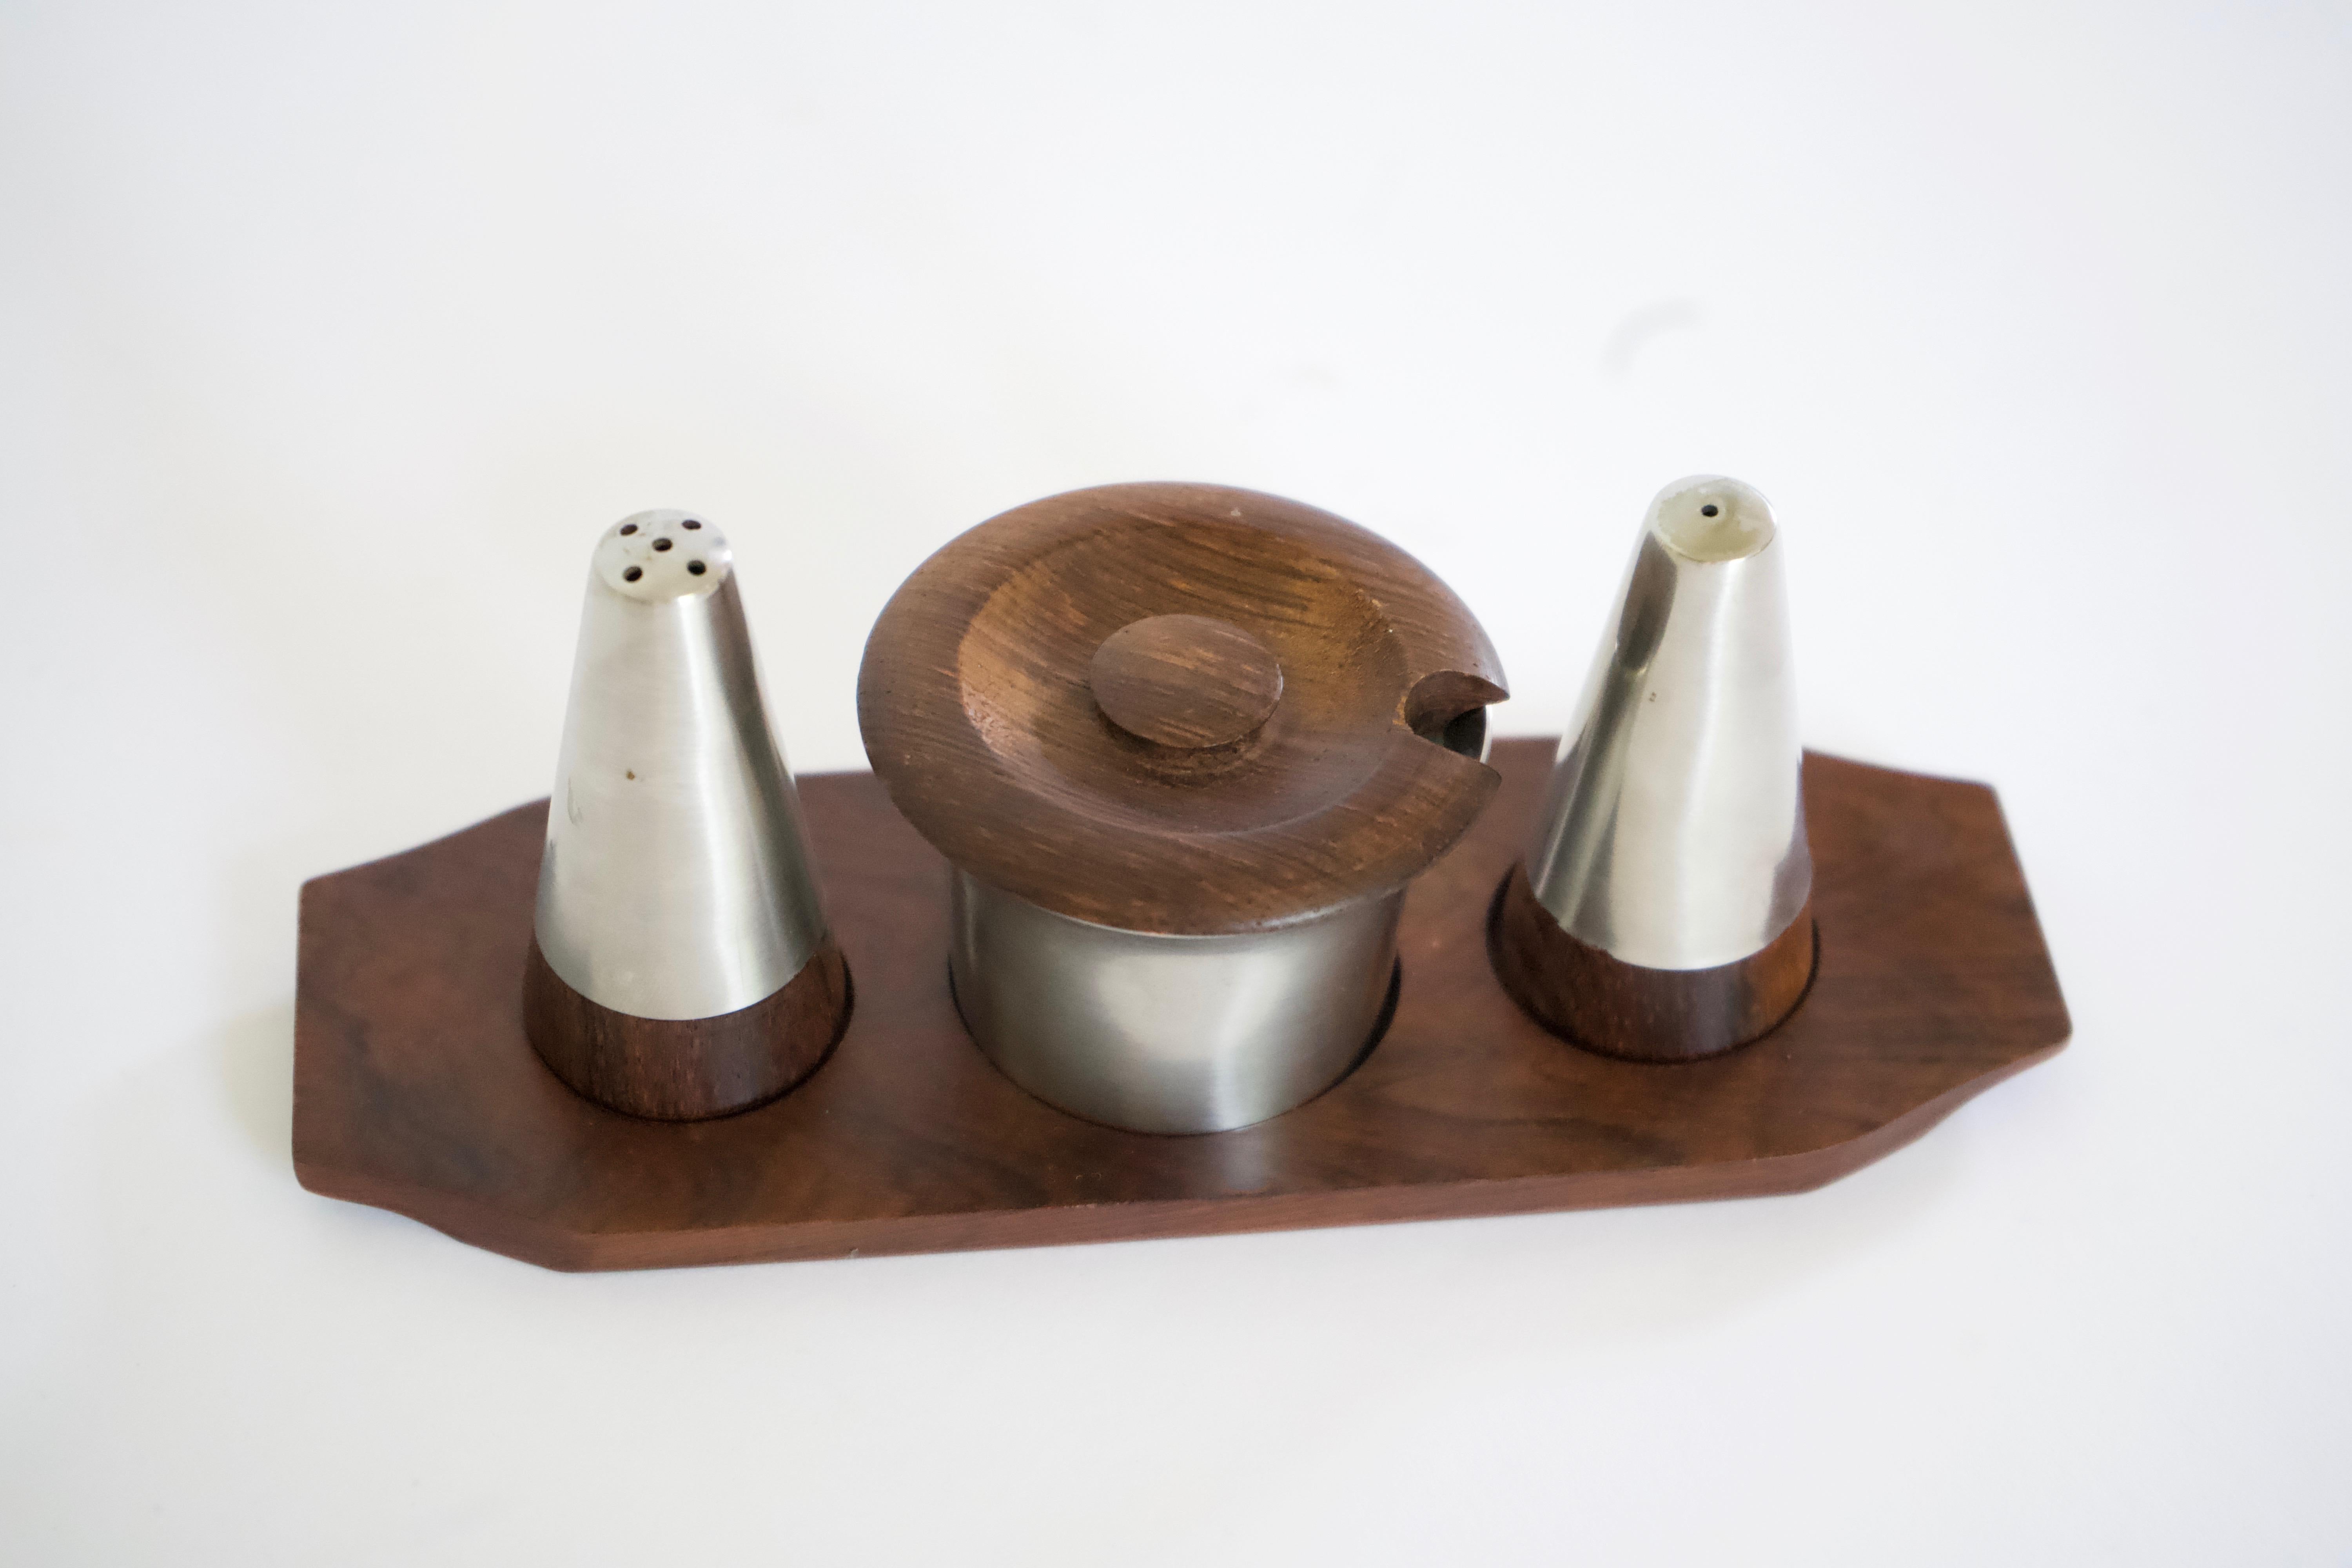 Mid-Century Modern Danish Rosewood Salt and Pepper Shaker Set by Lundtofte In Good Condition For Sale In Pittsburgh, PA